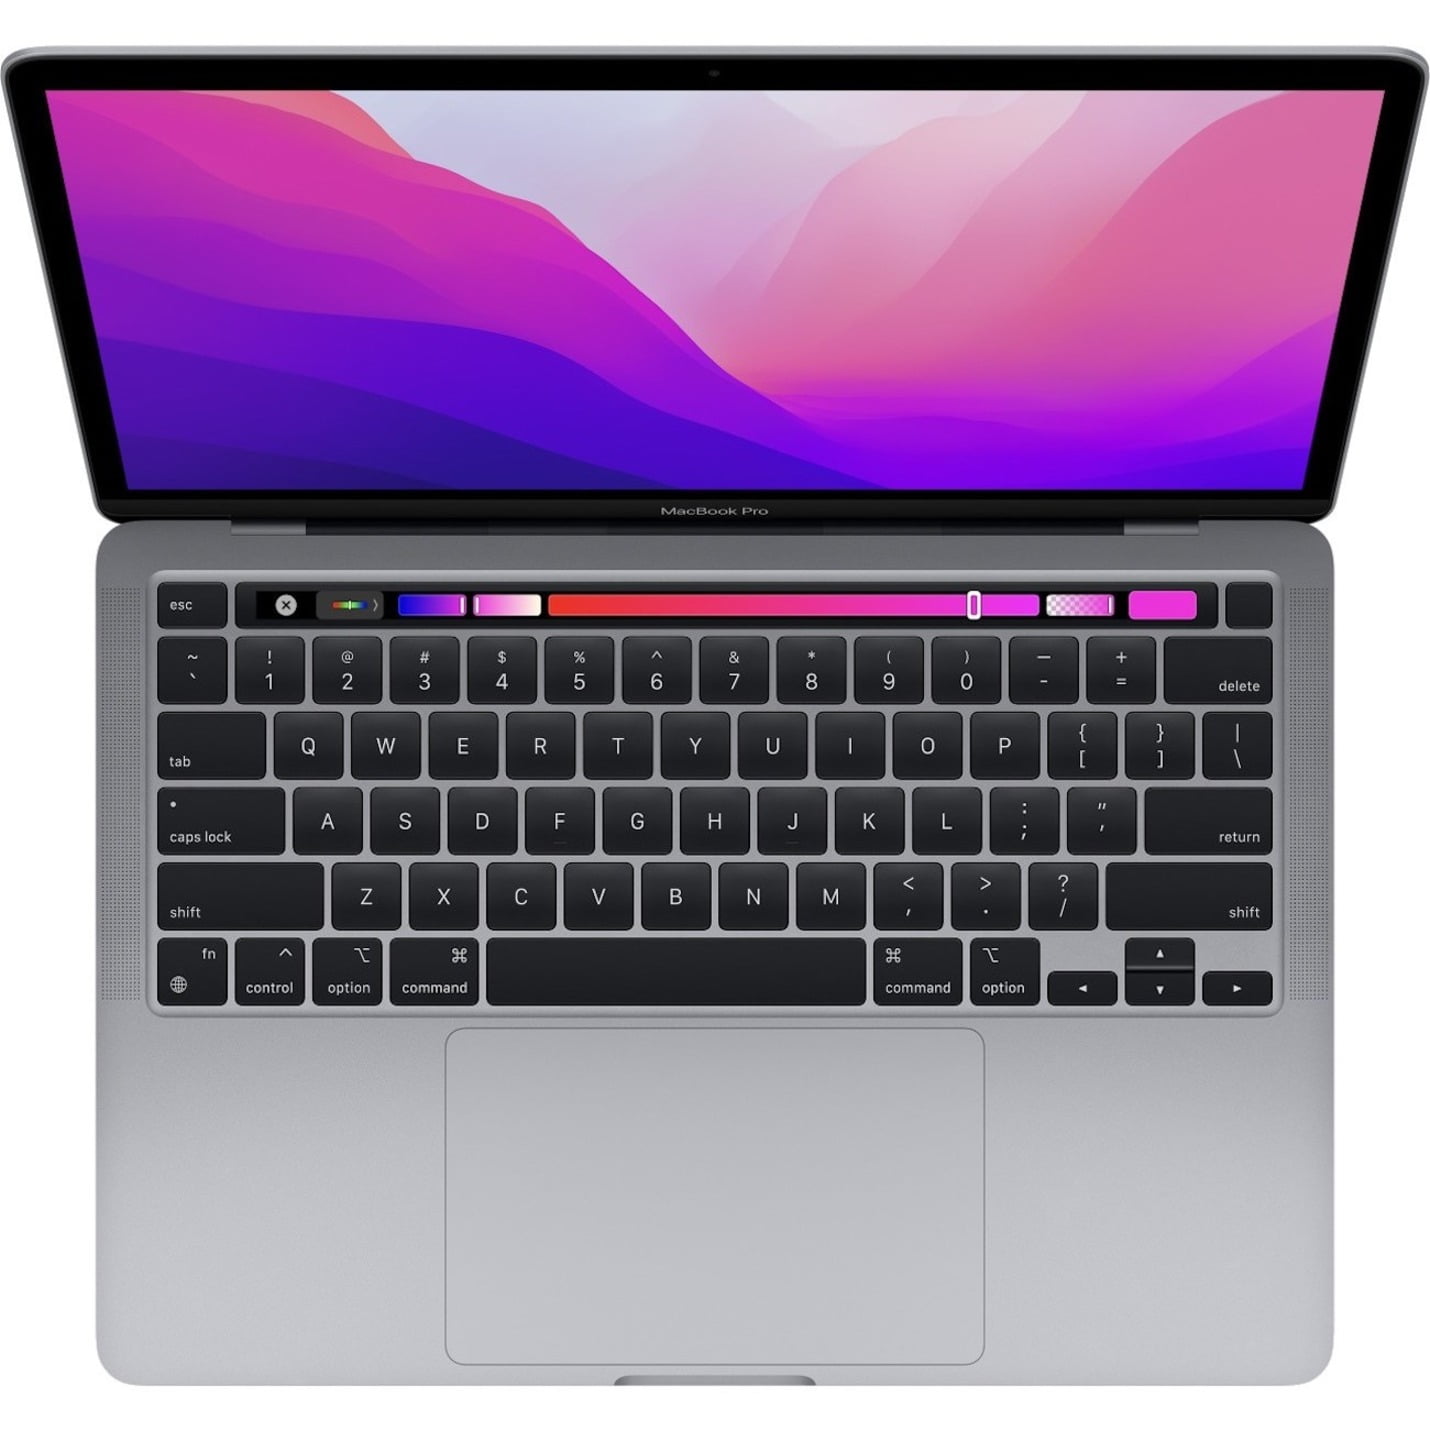 2022 Apple MacBook Pro Laptop with M2 chip: 13-inch Retina Display, 8GB  RAM, 256GB SSD , Storage, Touch Bar, Backlit Keyboard, FaceTime HD Camera. 